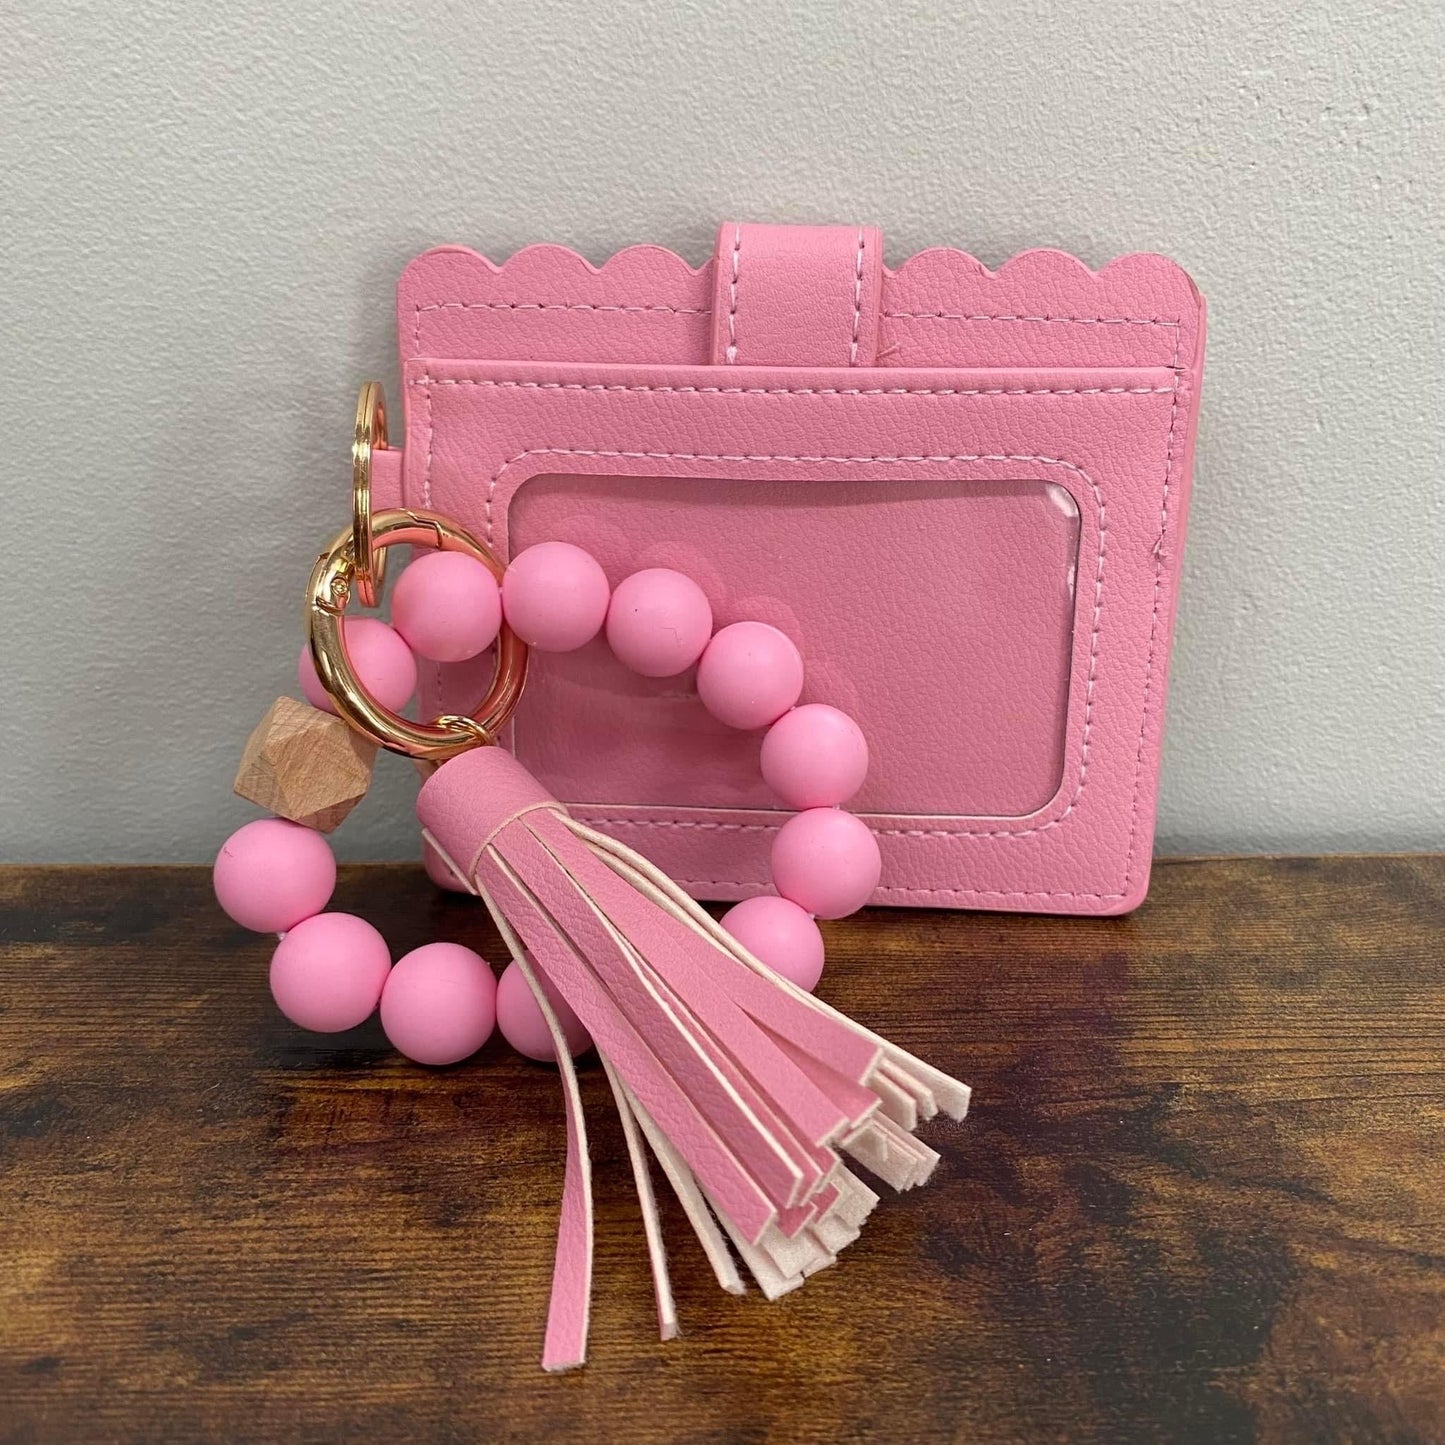 Silicone Bracelet Keychain with Scalloped Card Holder - Pink